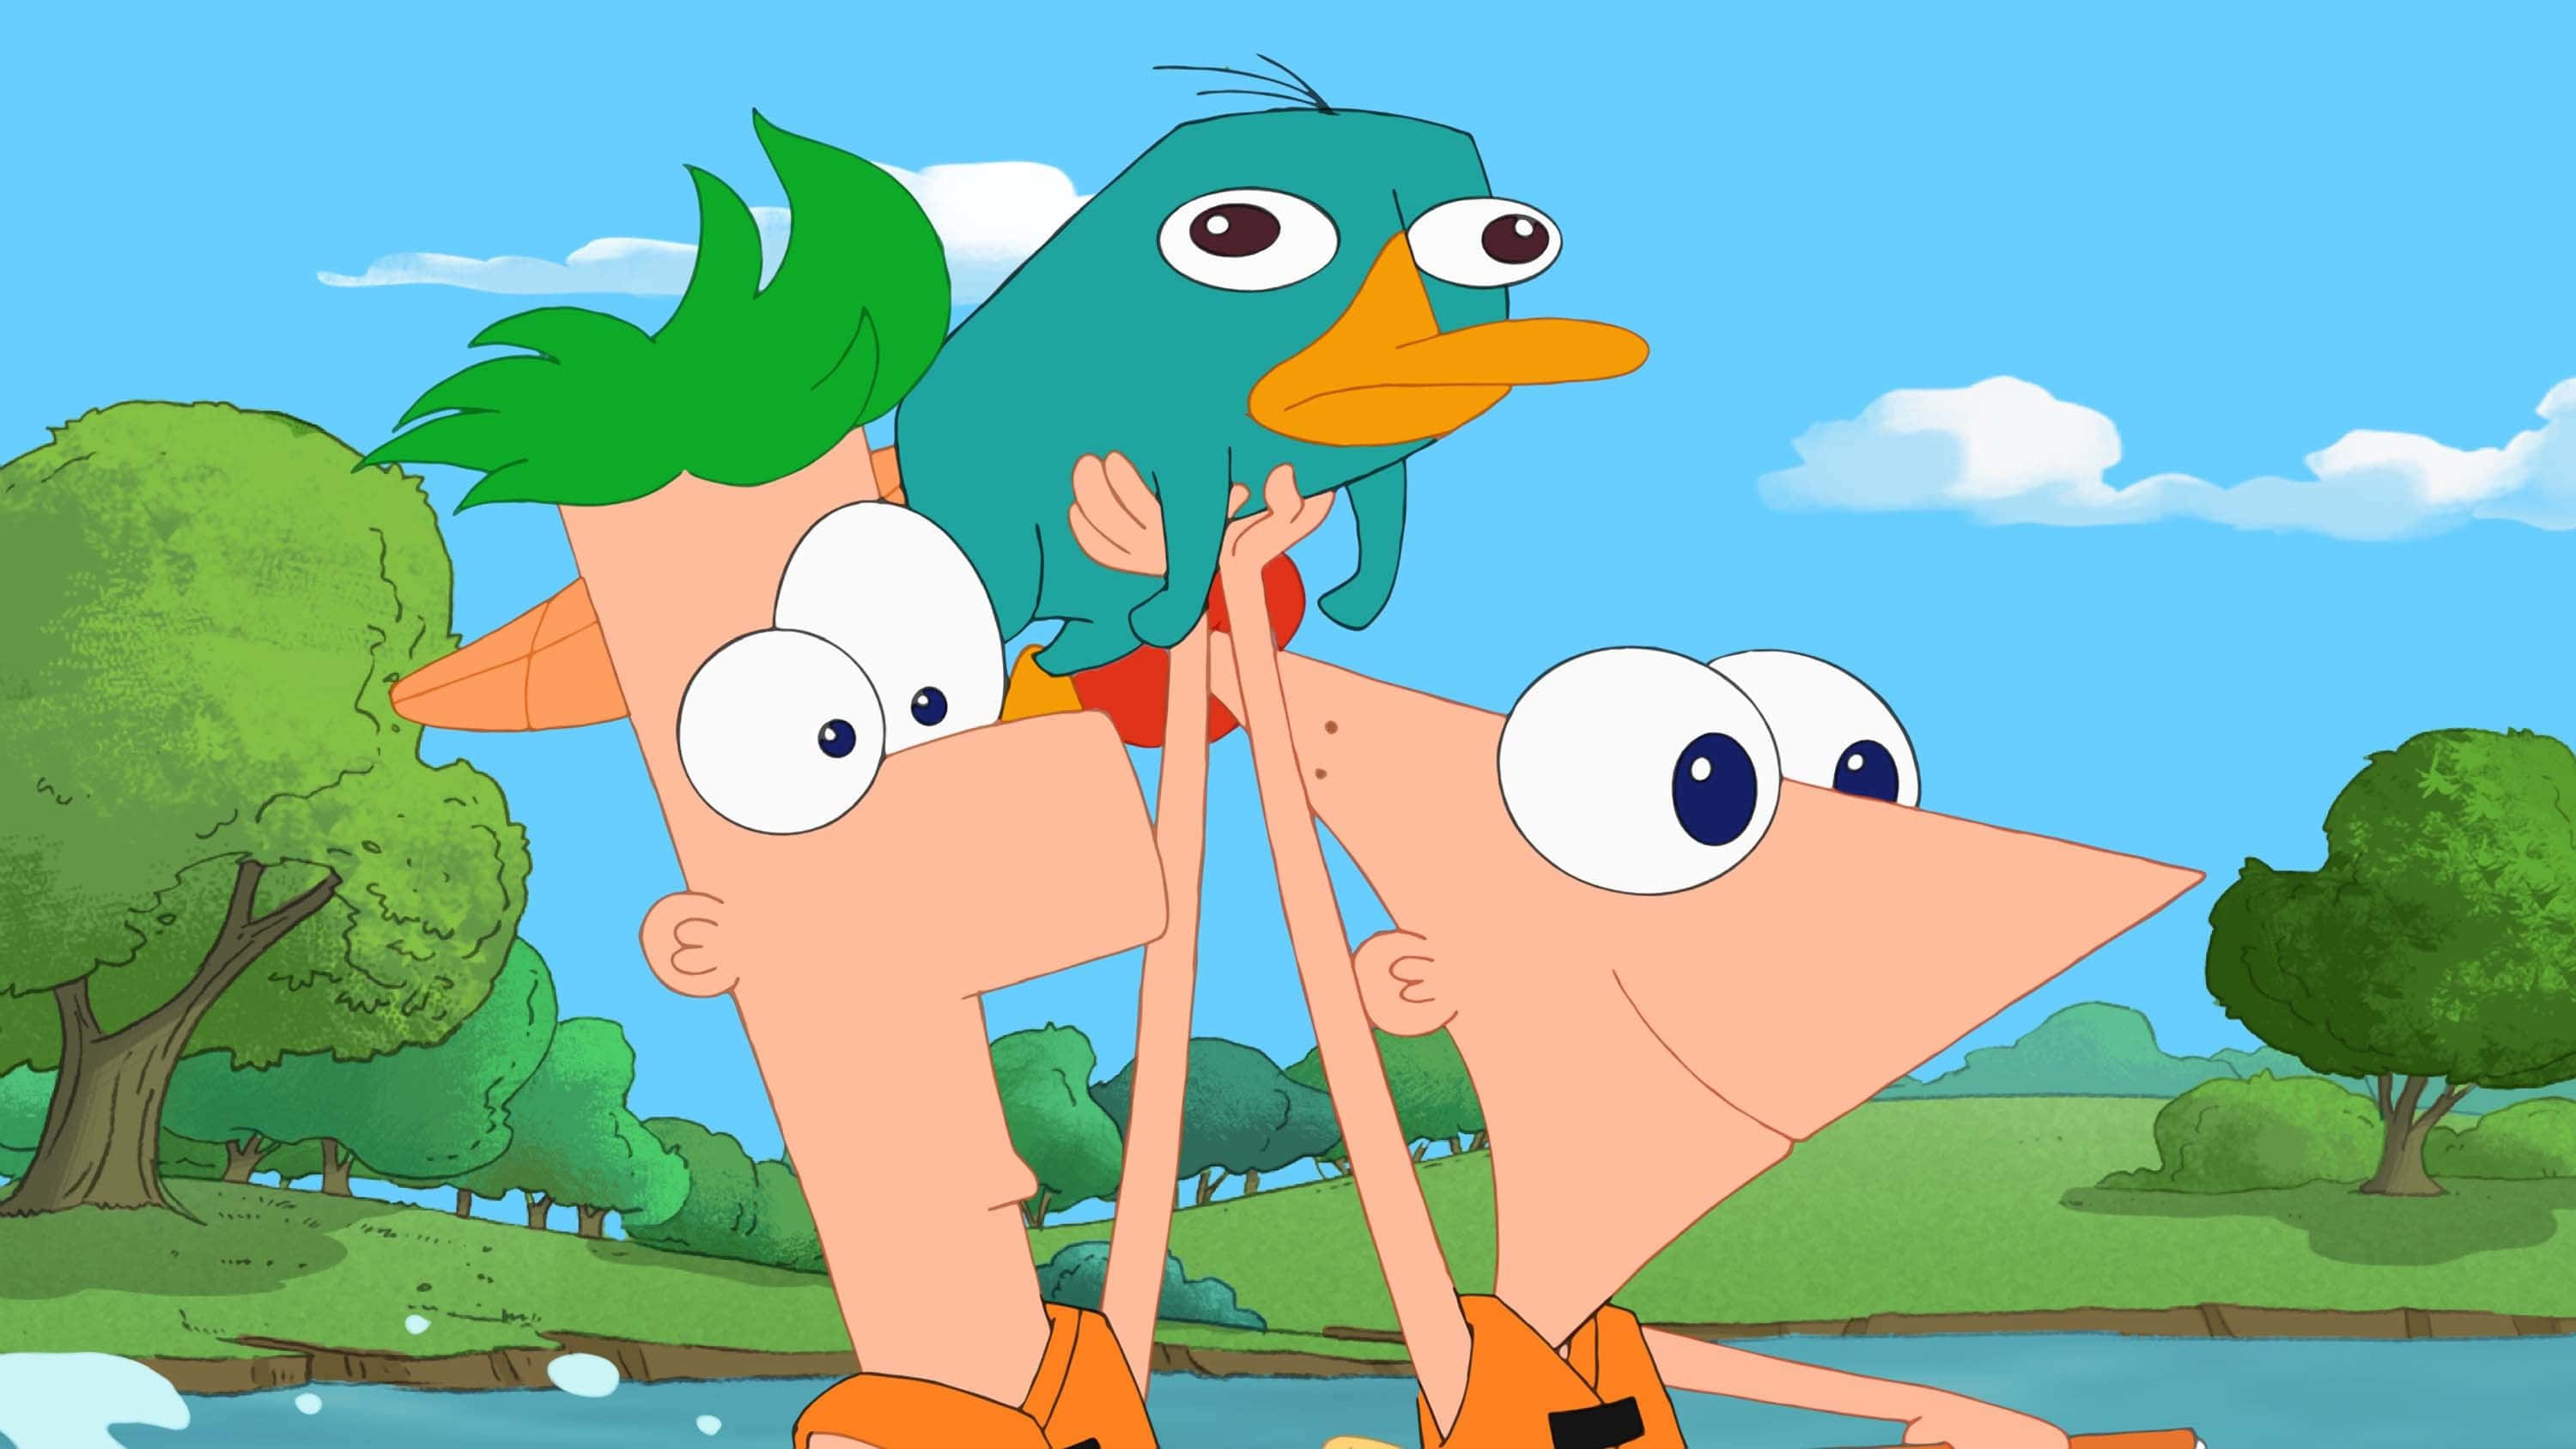 Phineas and Ferb having fun with their friends during summertime